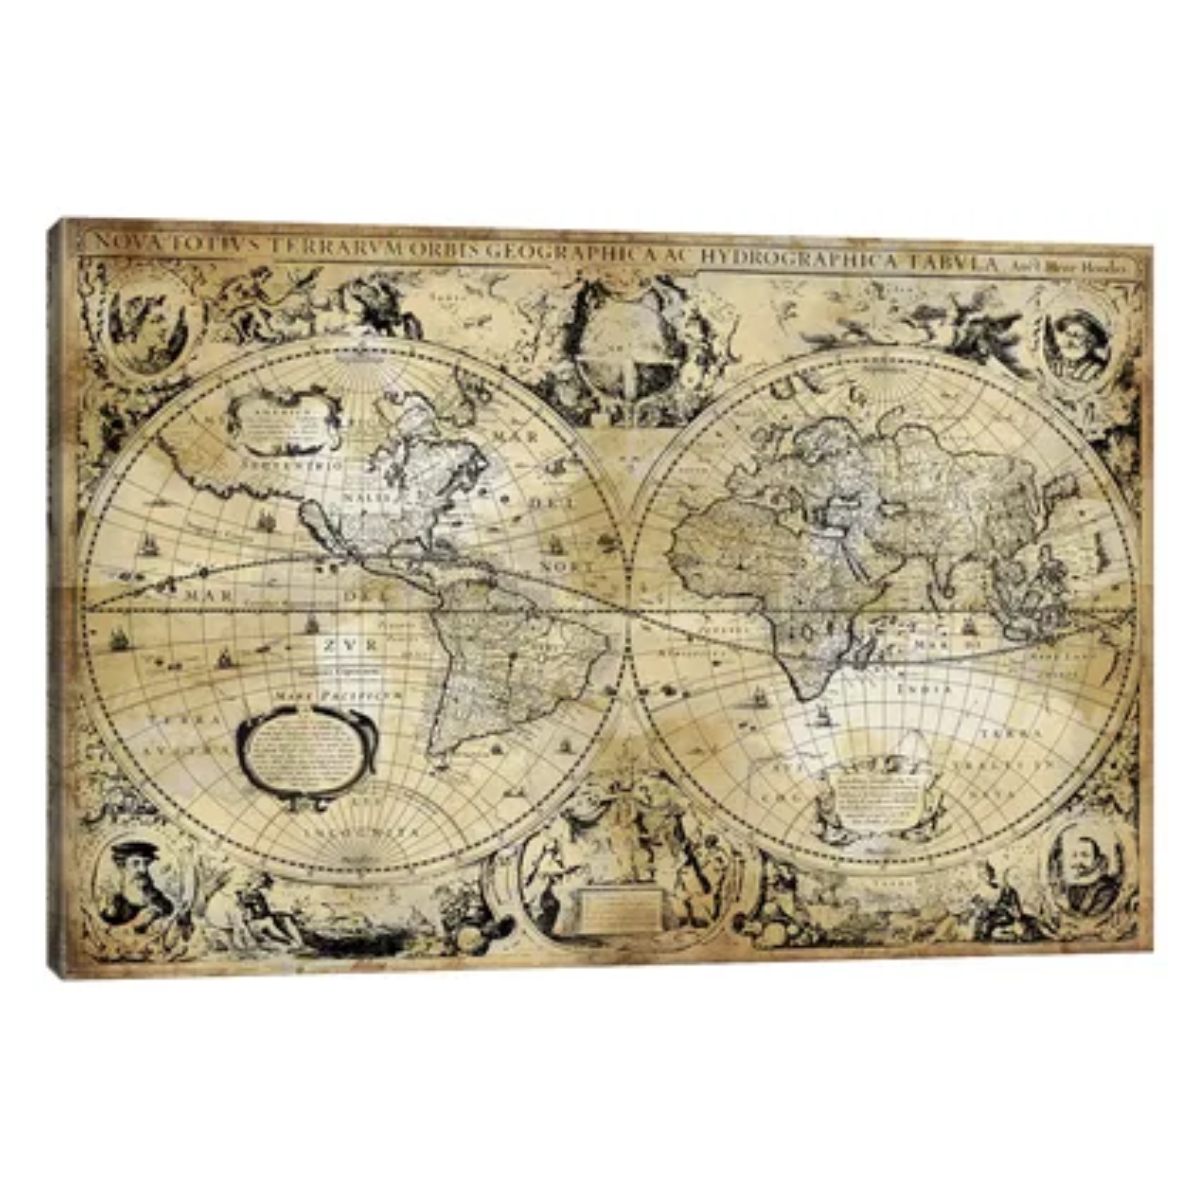 20. Antique Map Wall Art: A Unique and Thoughtful Anniversary Gift for Him